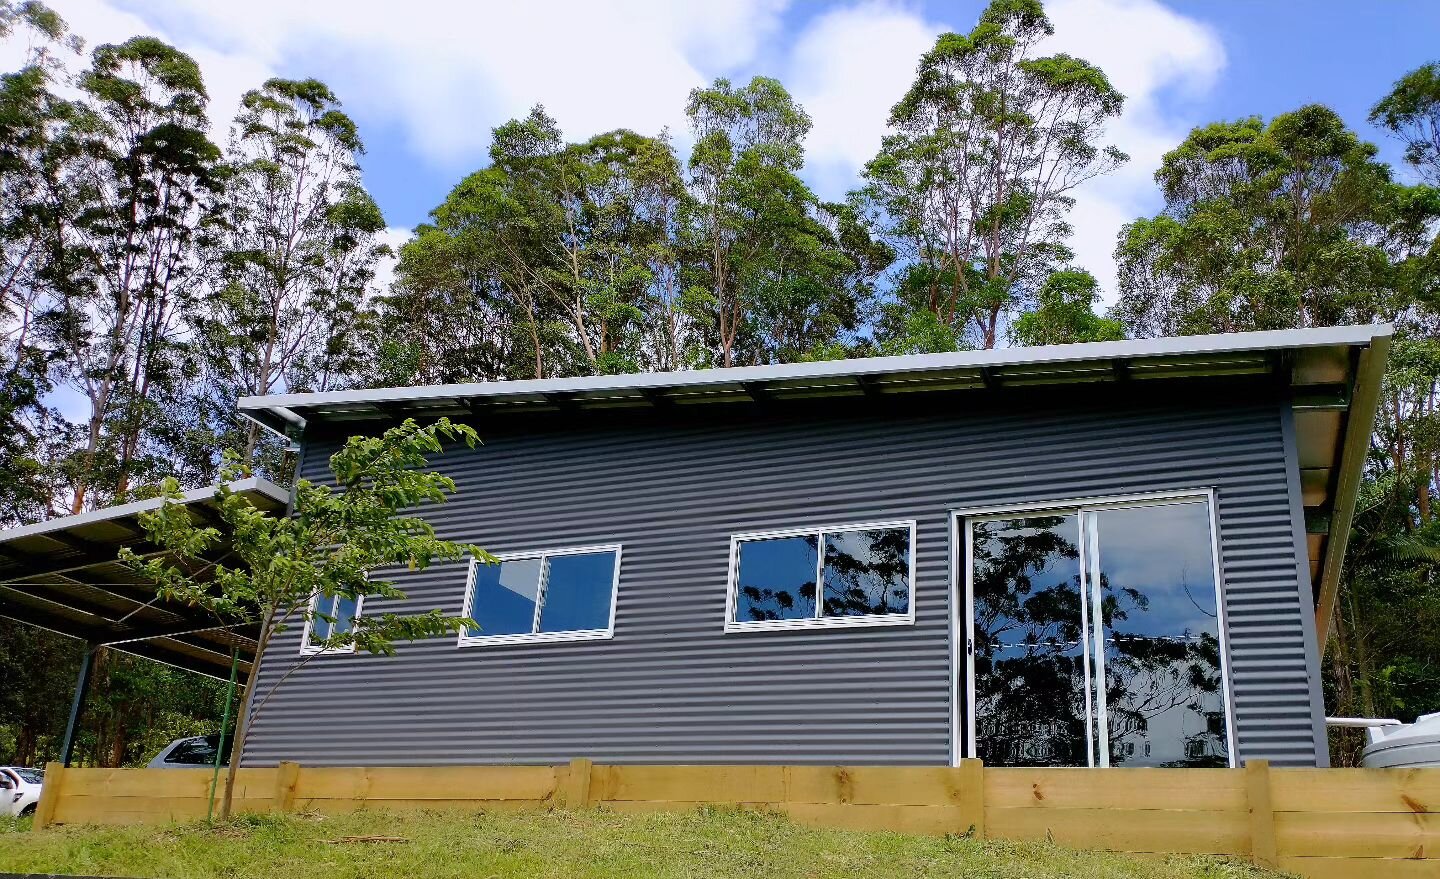 In this construction project, we achieved an appealing  contrast by pairing #Colorbond #Surfmist for the roof, trim, windows, and sliding door with #Basalt Matt cladding. 

Project details:
🛠 Complete design, supply &amp; build by our qualified team